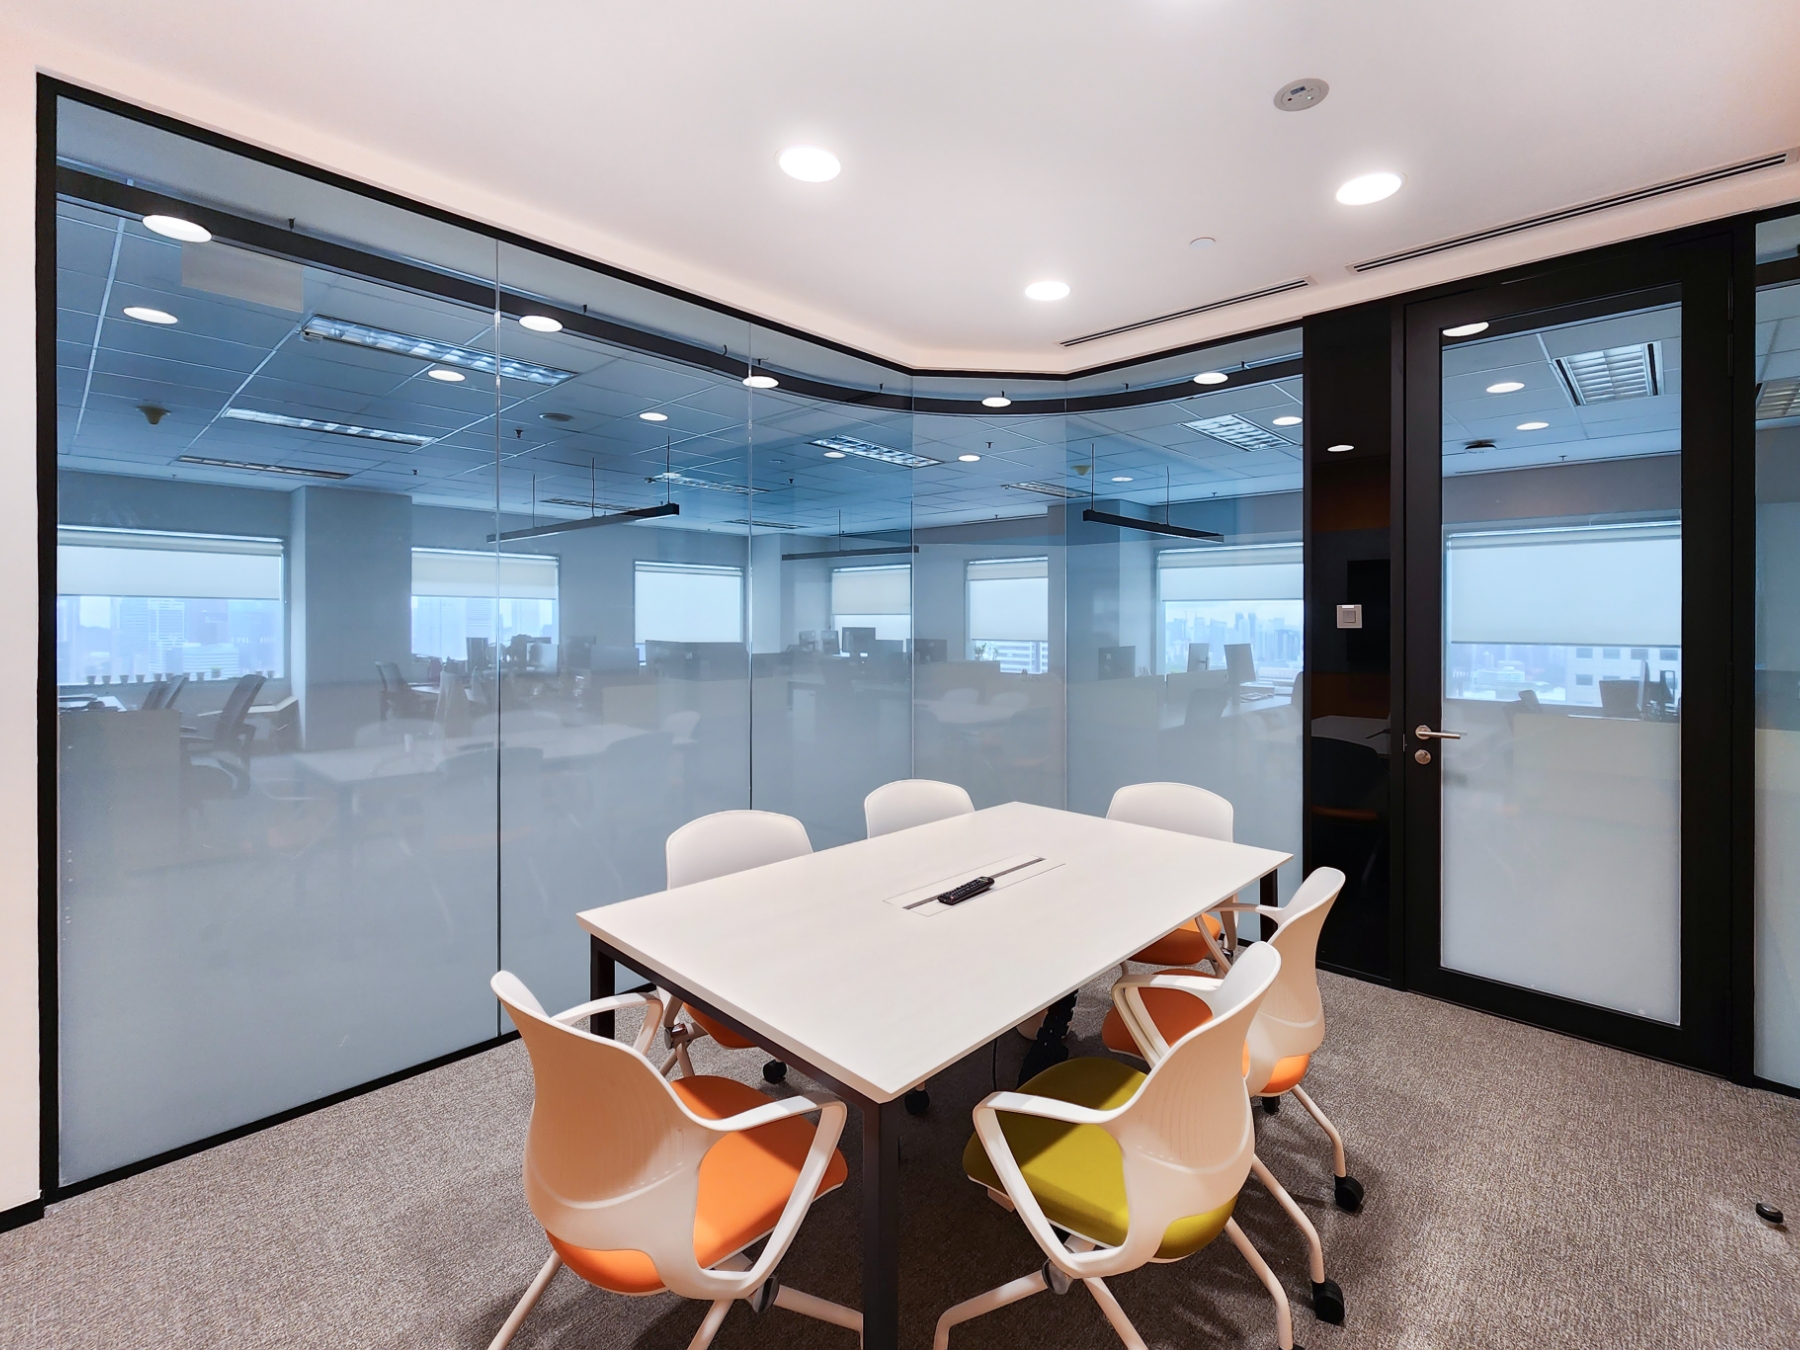 Single Glazed Glass Partitioning with Single Glazed Glass Doors Interior View